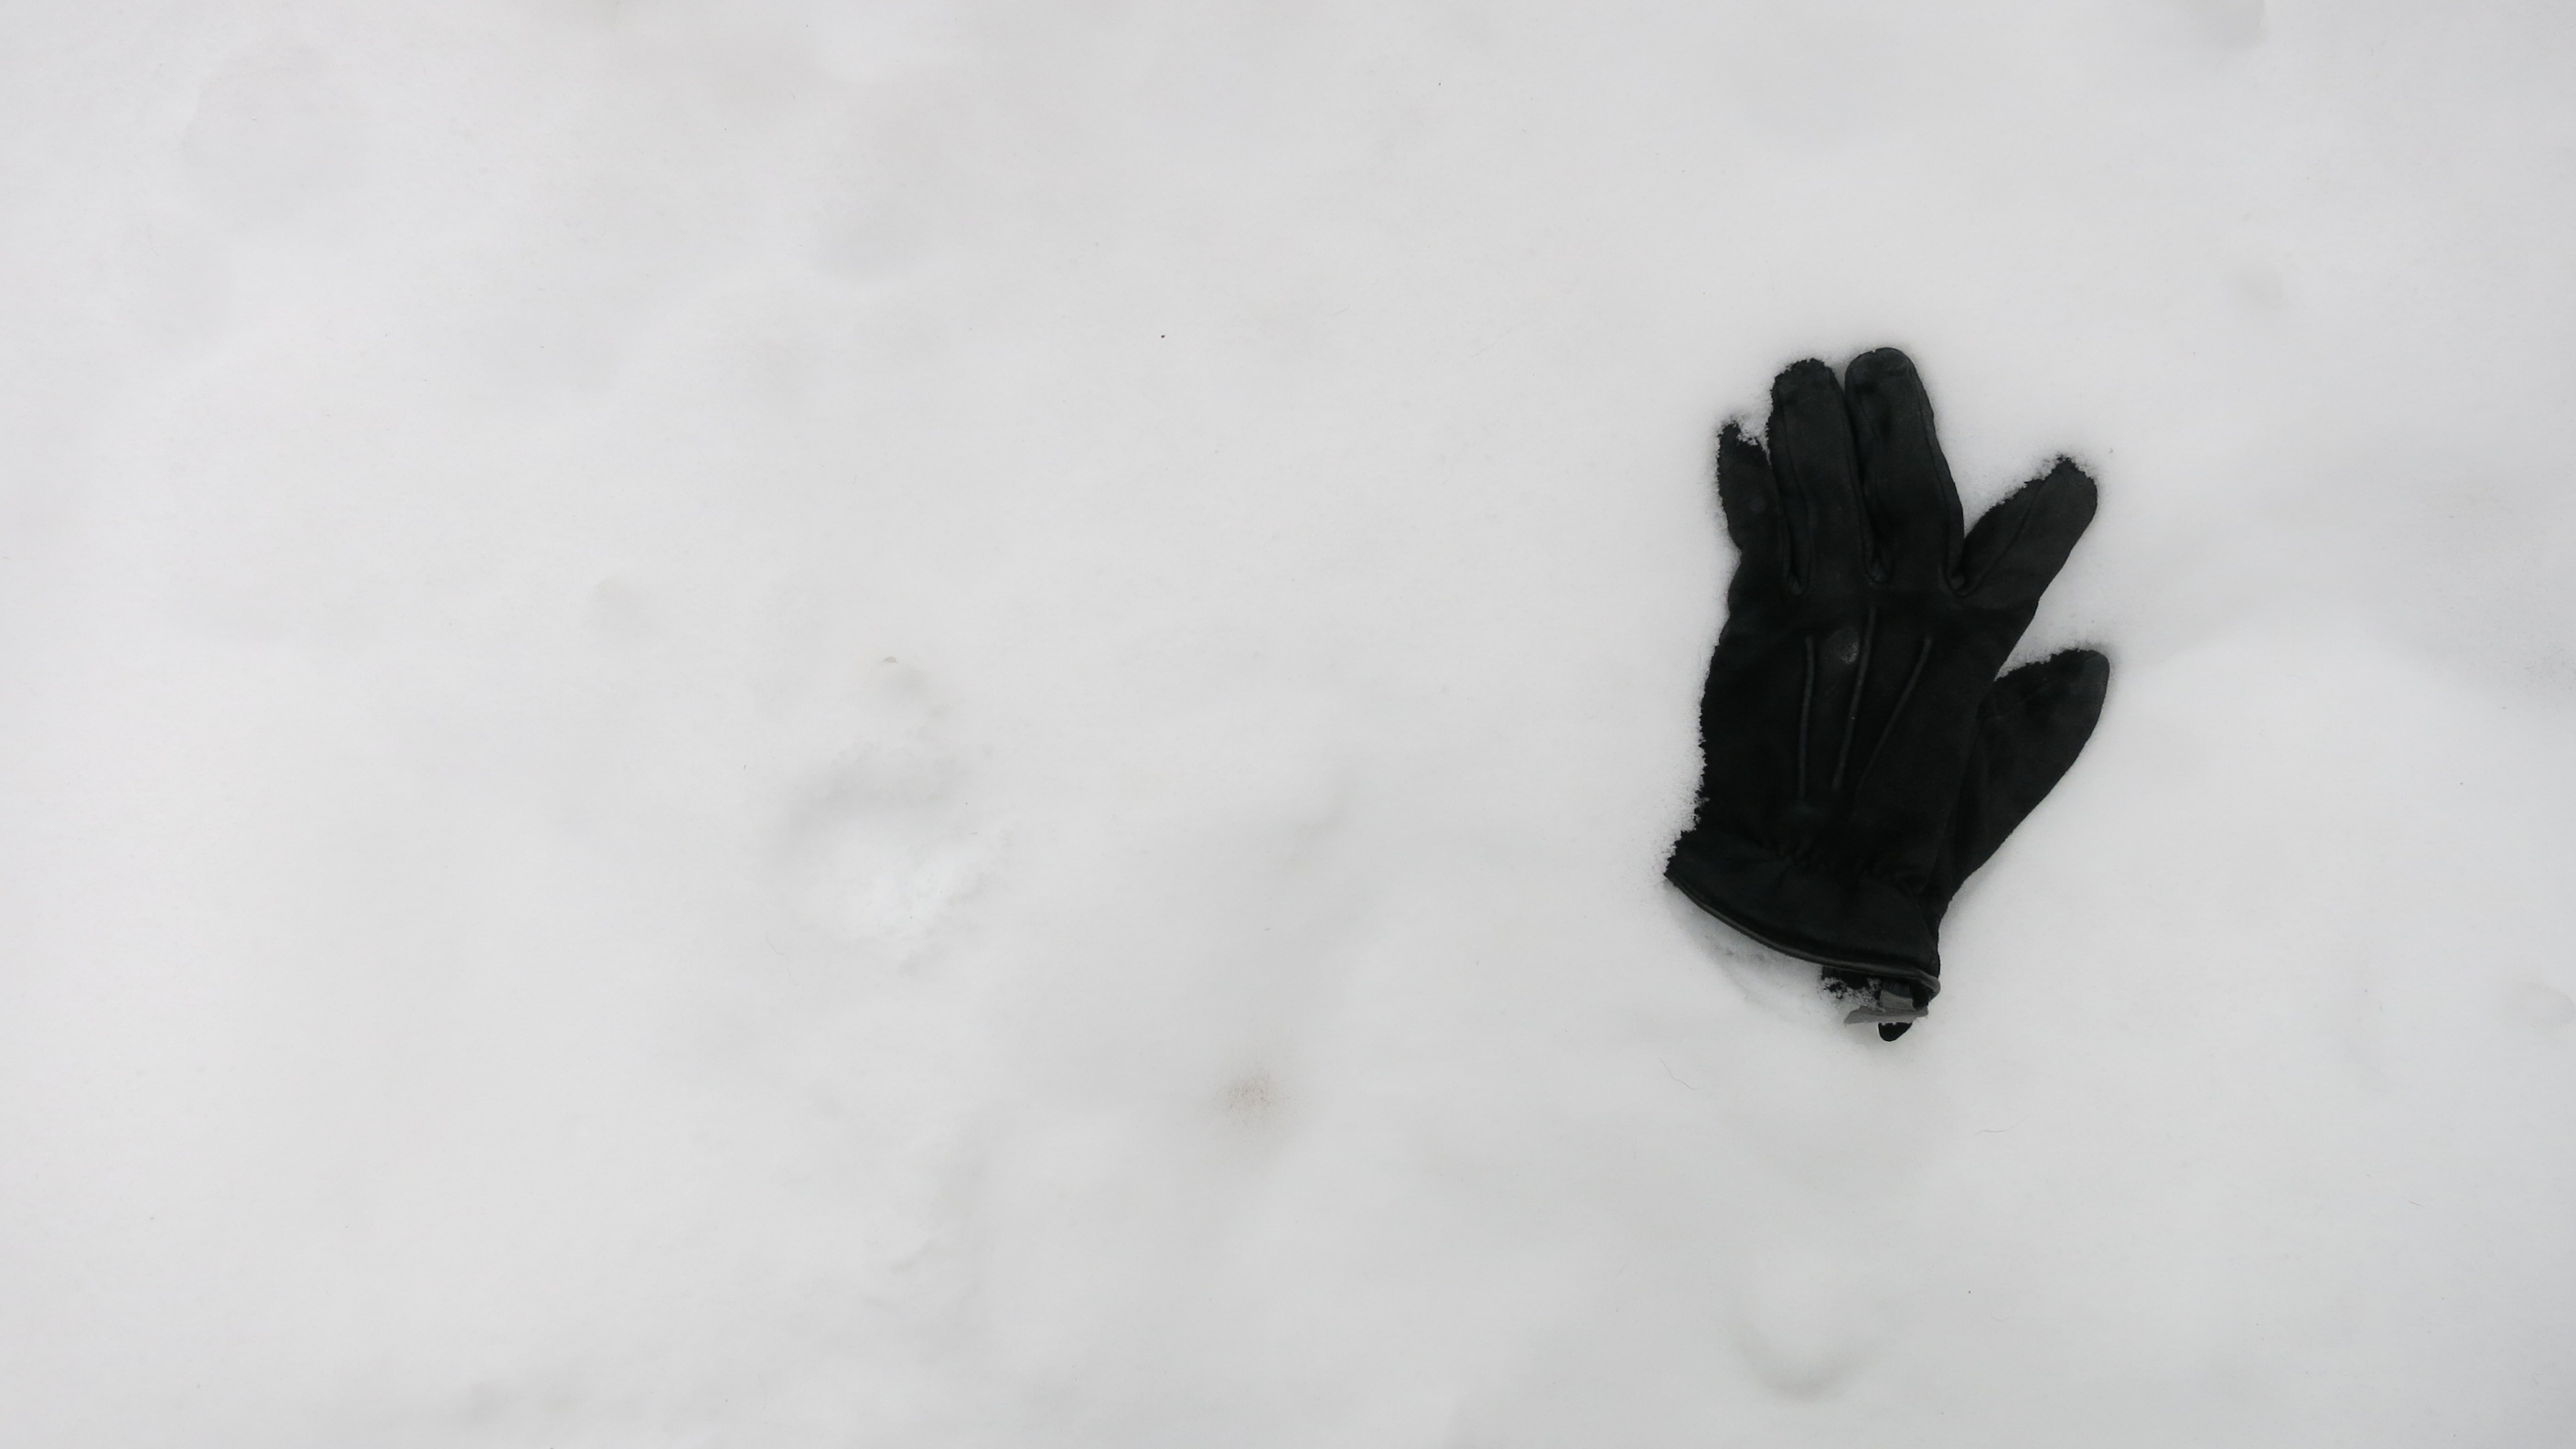 Gallery of Lost Gloves